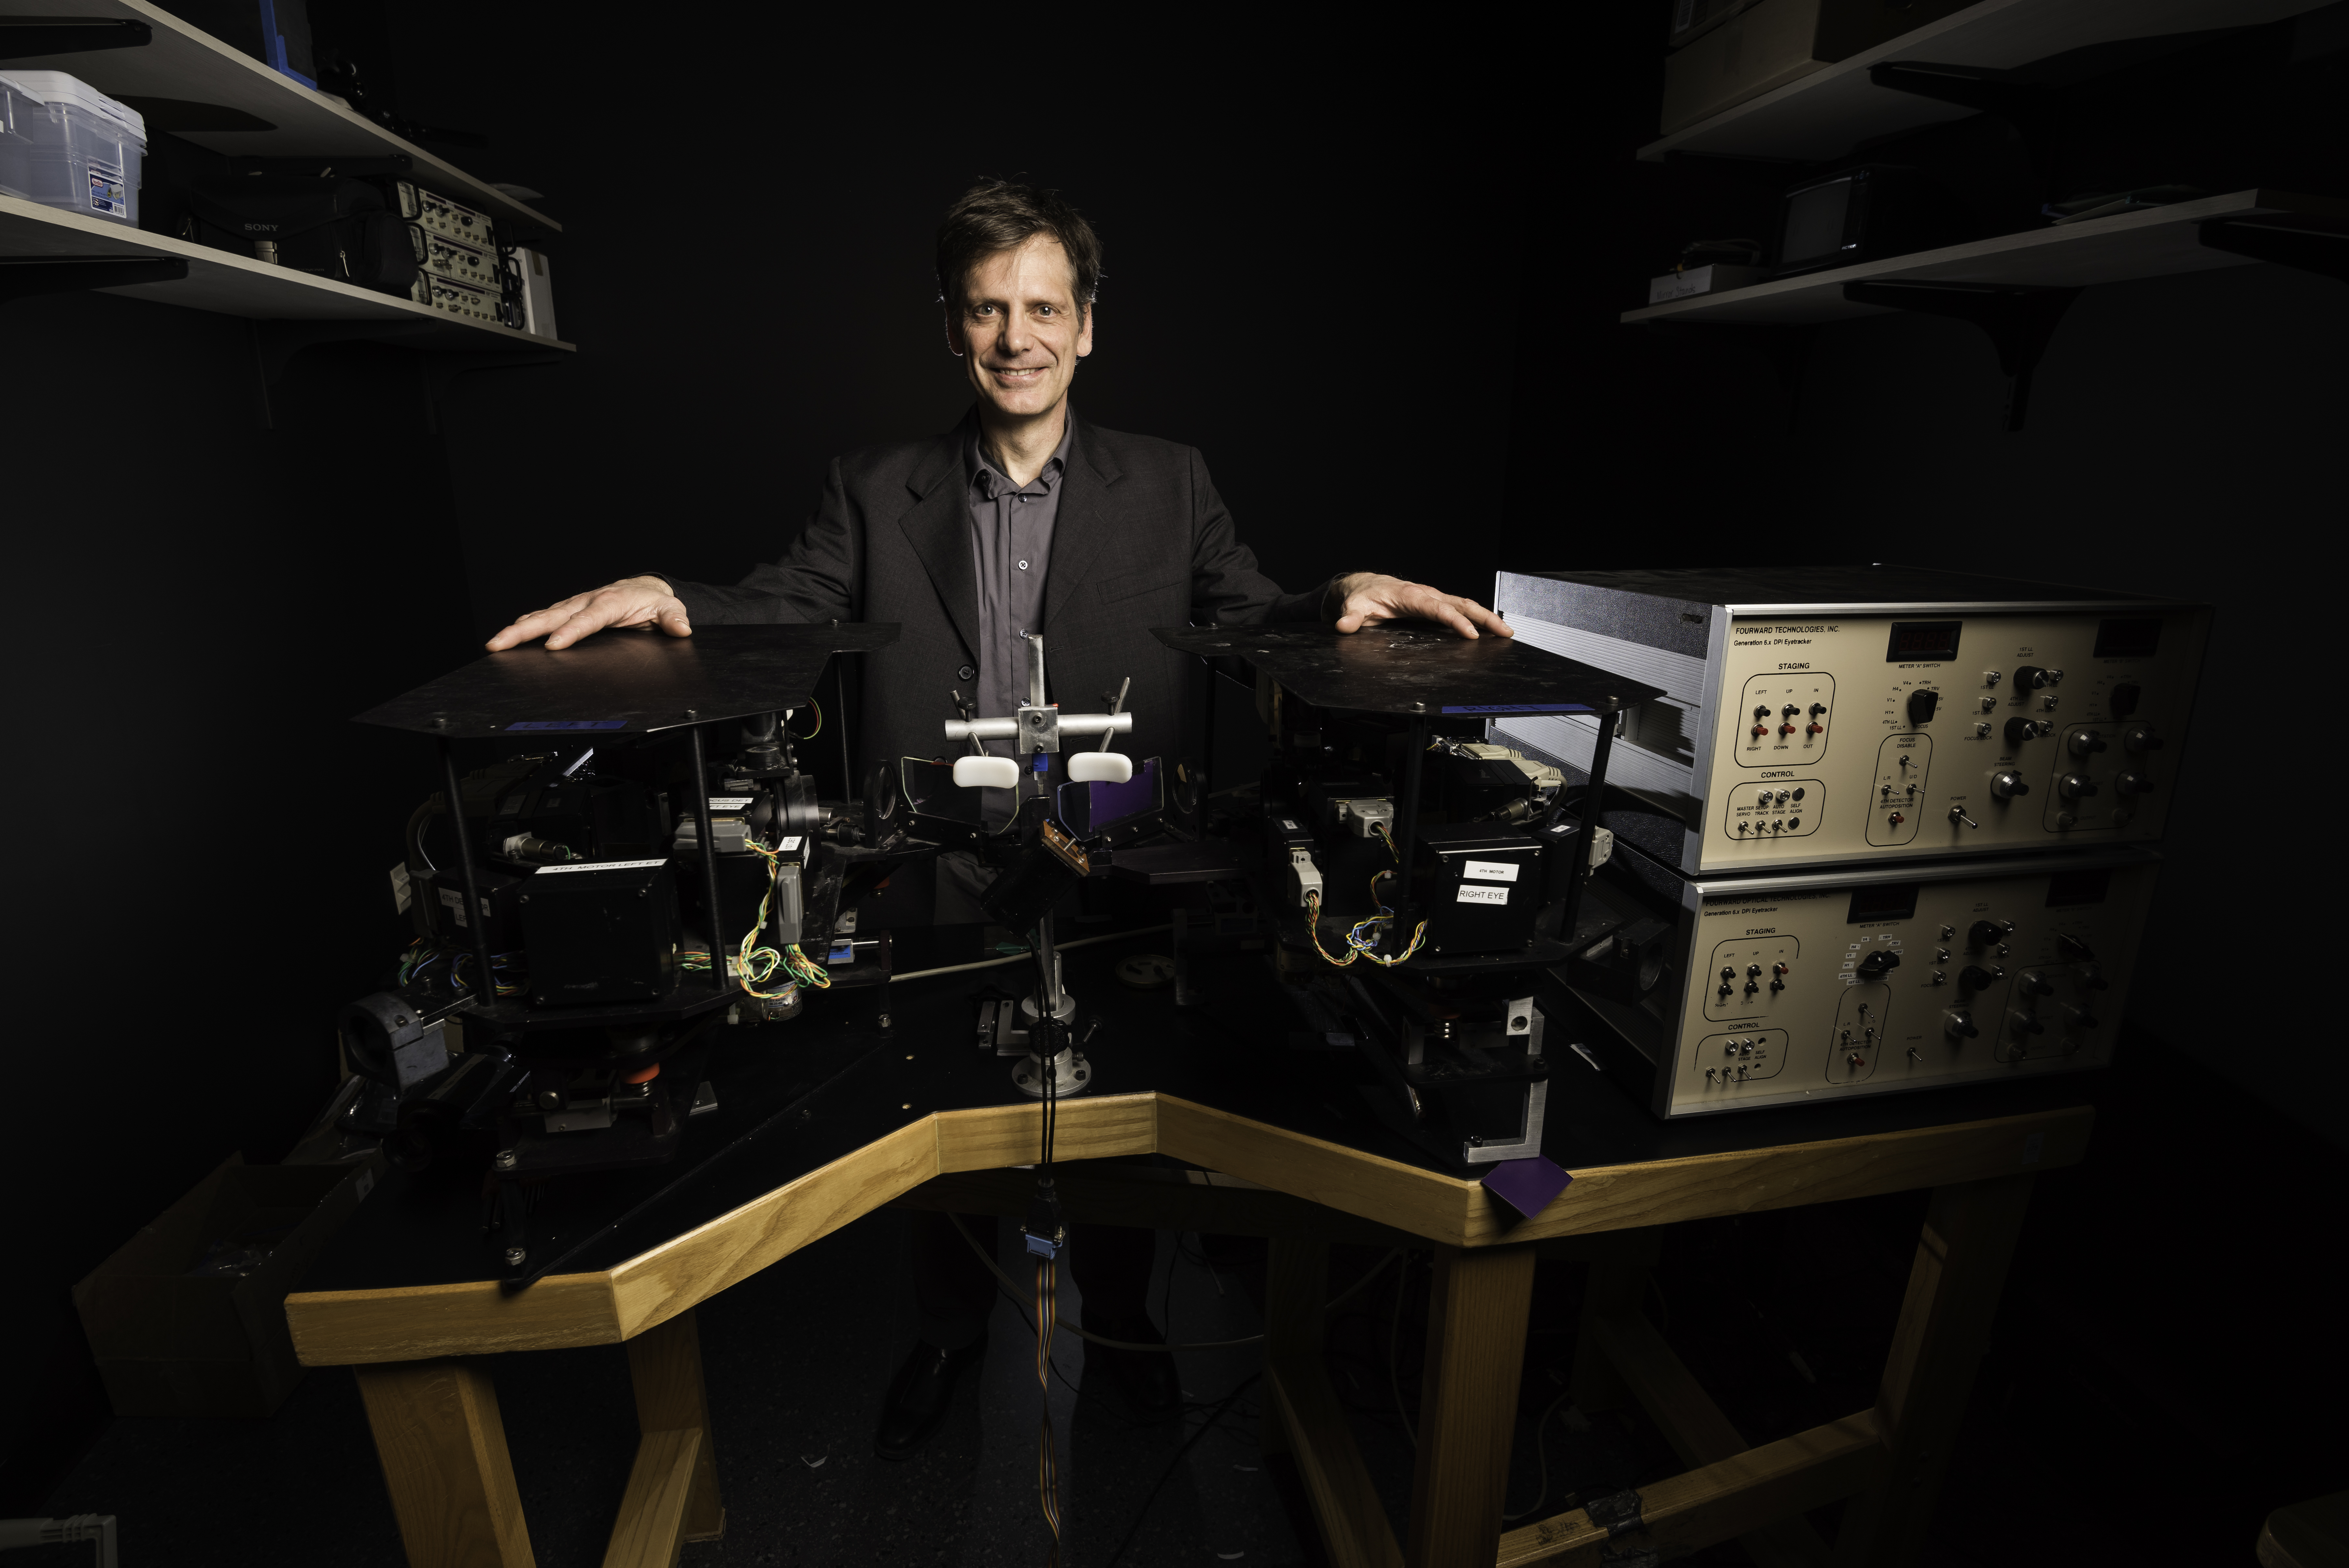 professor Michele Rucci with equipment in his lab